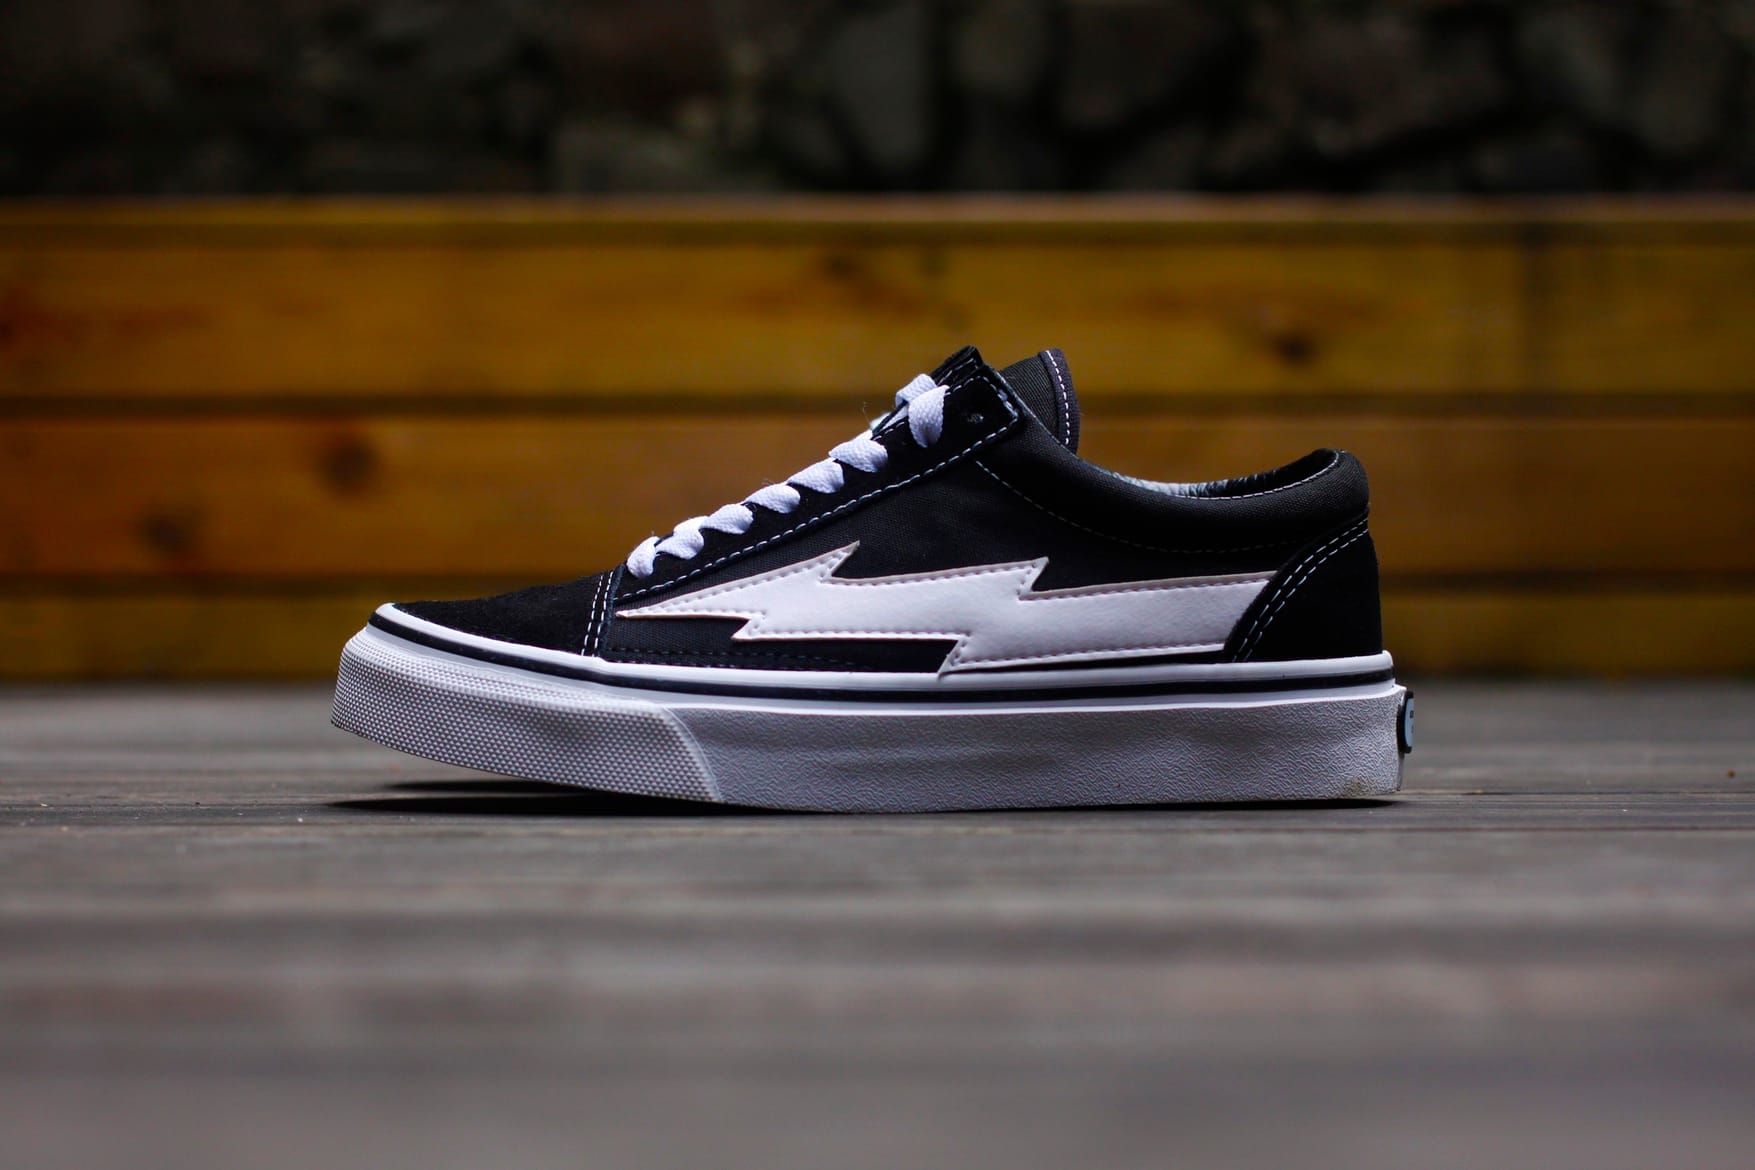 vans looking shoes with lightning bolt